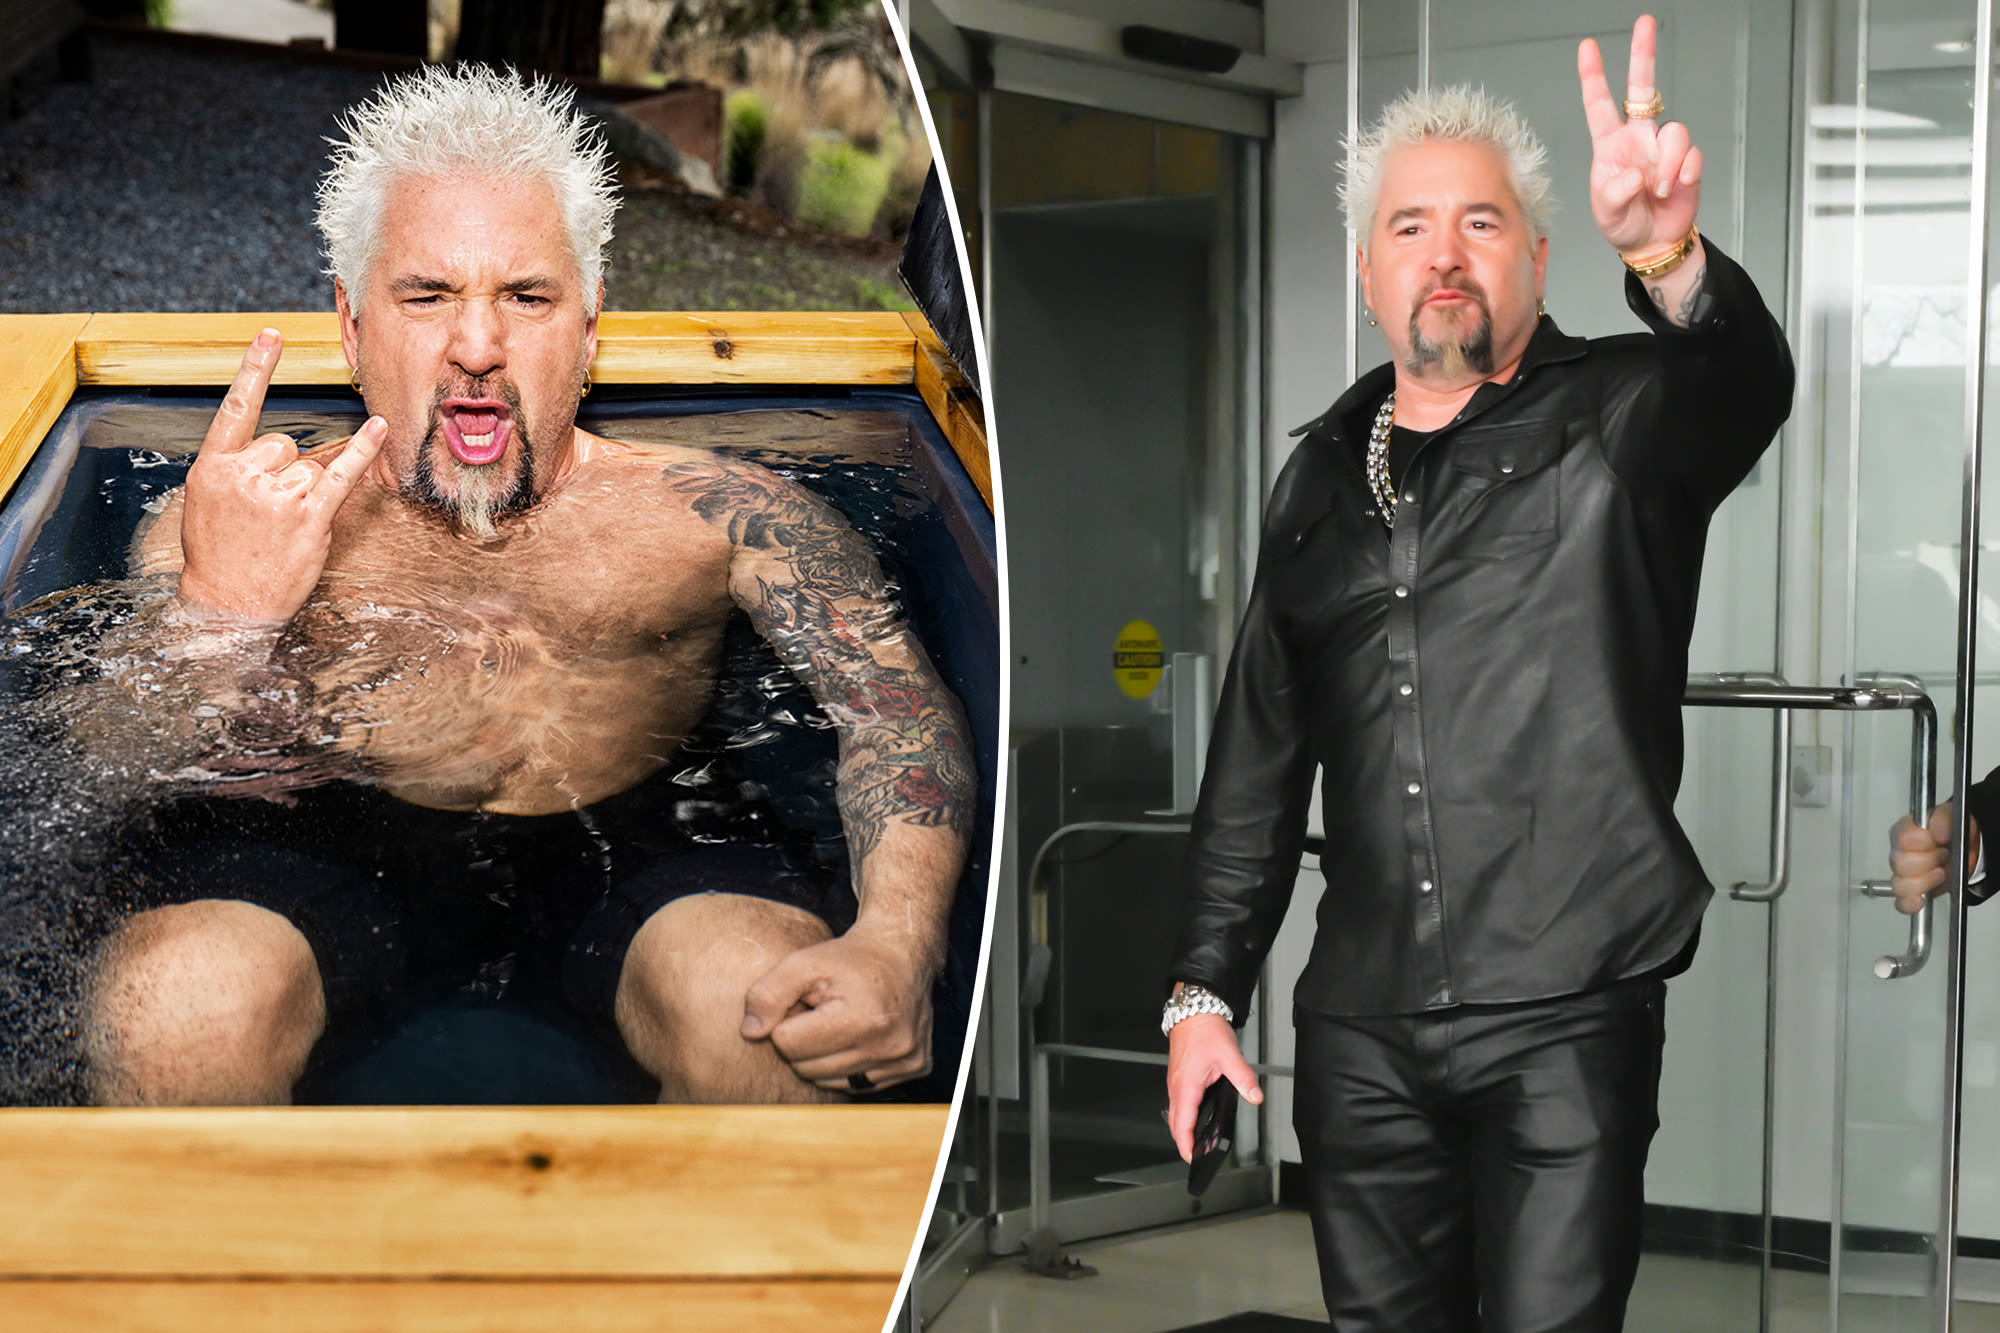 Guy Fieri reveals the key piece of fitness gear that helped him lose 30 pounds